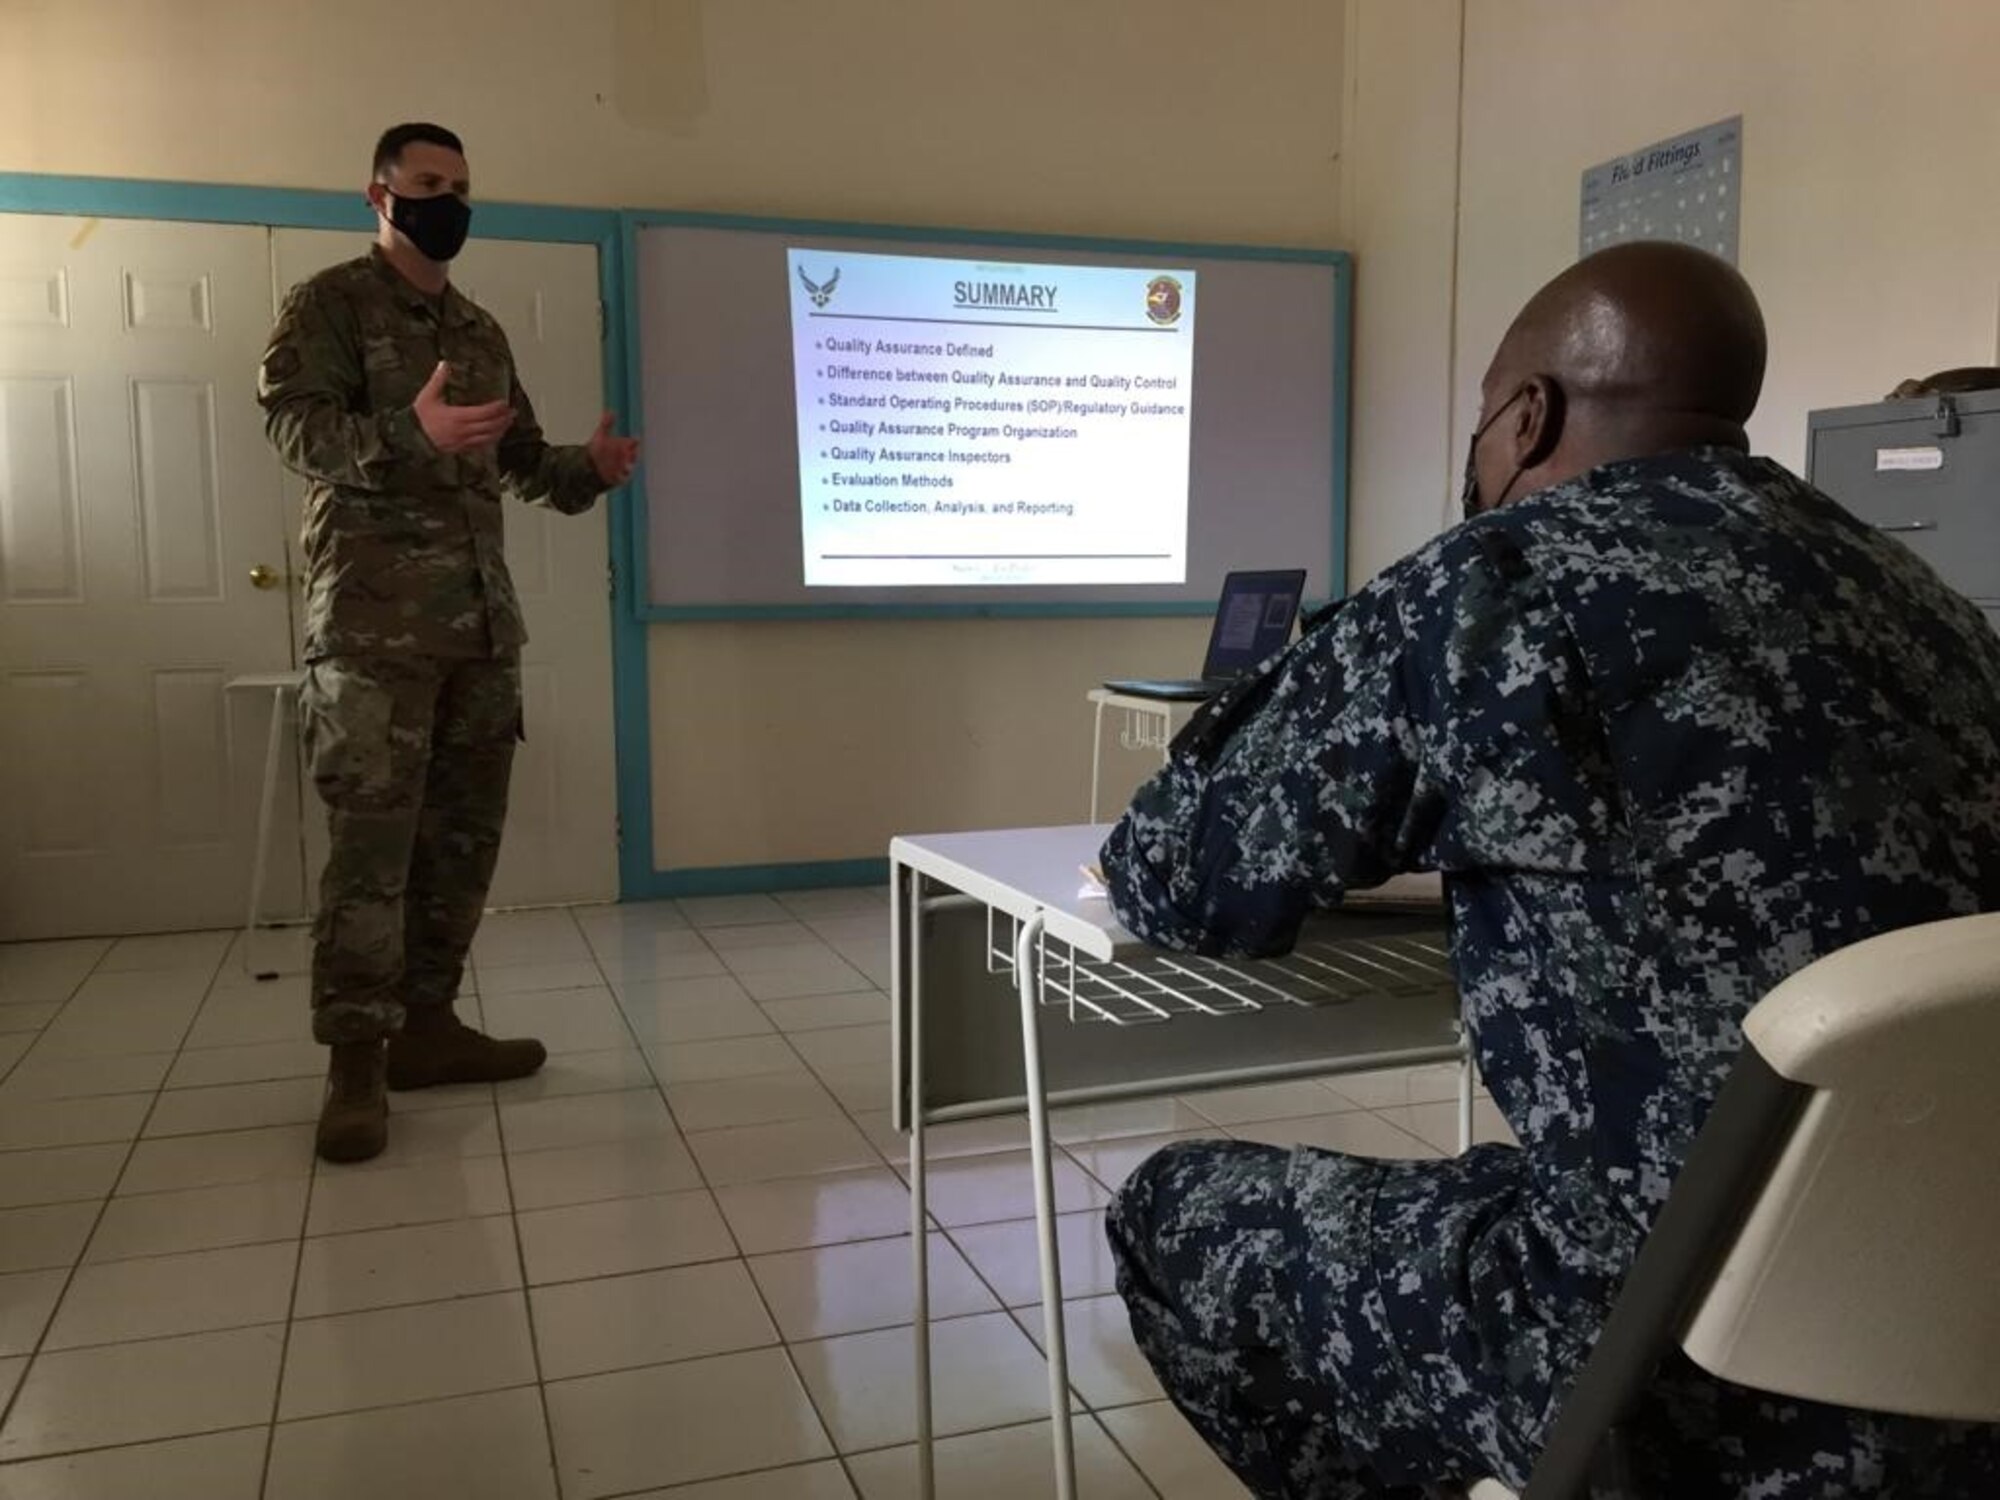 Tech. Sgt. Jacob Haines, 571st Mobility Support Advisory Squadron air advisor, discusses aircraft maintenance quality assurance fundamentals with Maj. Gladstone Allen, Jamaican Defense Force Air Wing training and standards officer, June 15, 2021, in Kingston, Jamaica. Air advisors train and assist partner nations in developing air mobility capabilities through Mobile Training Team engagements. (Courtesy photo)